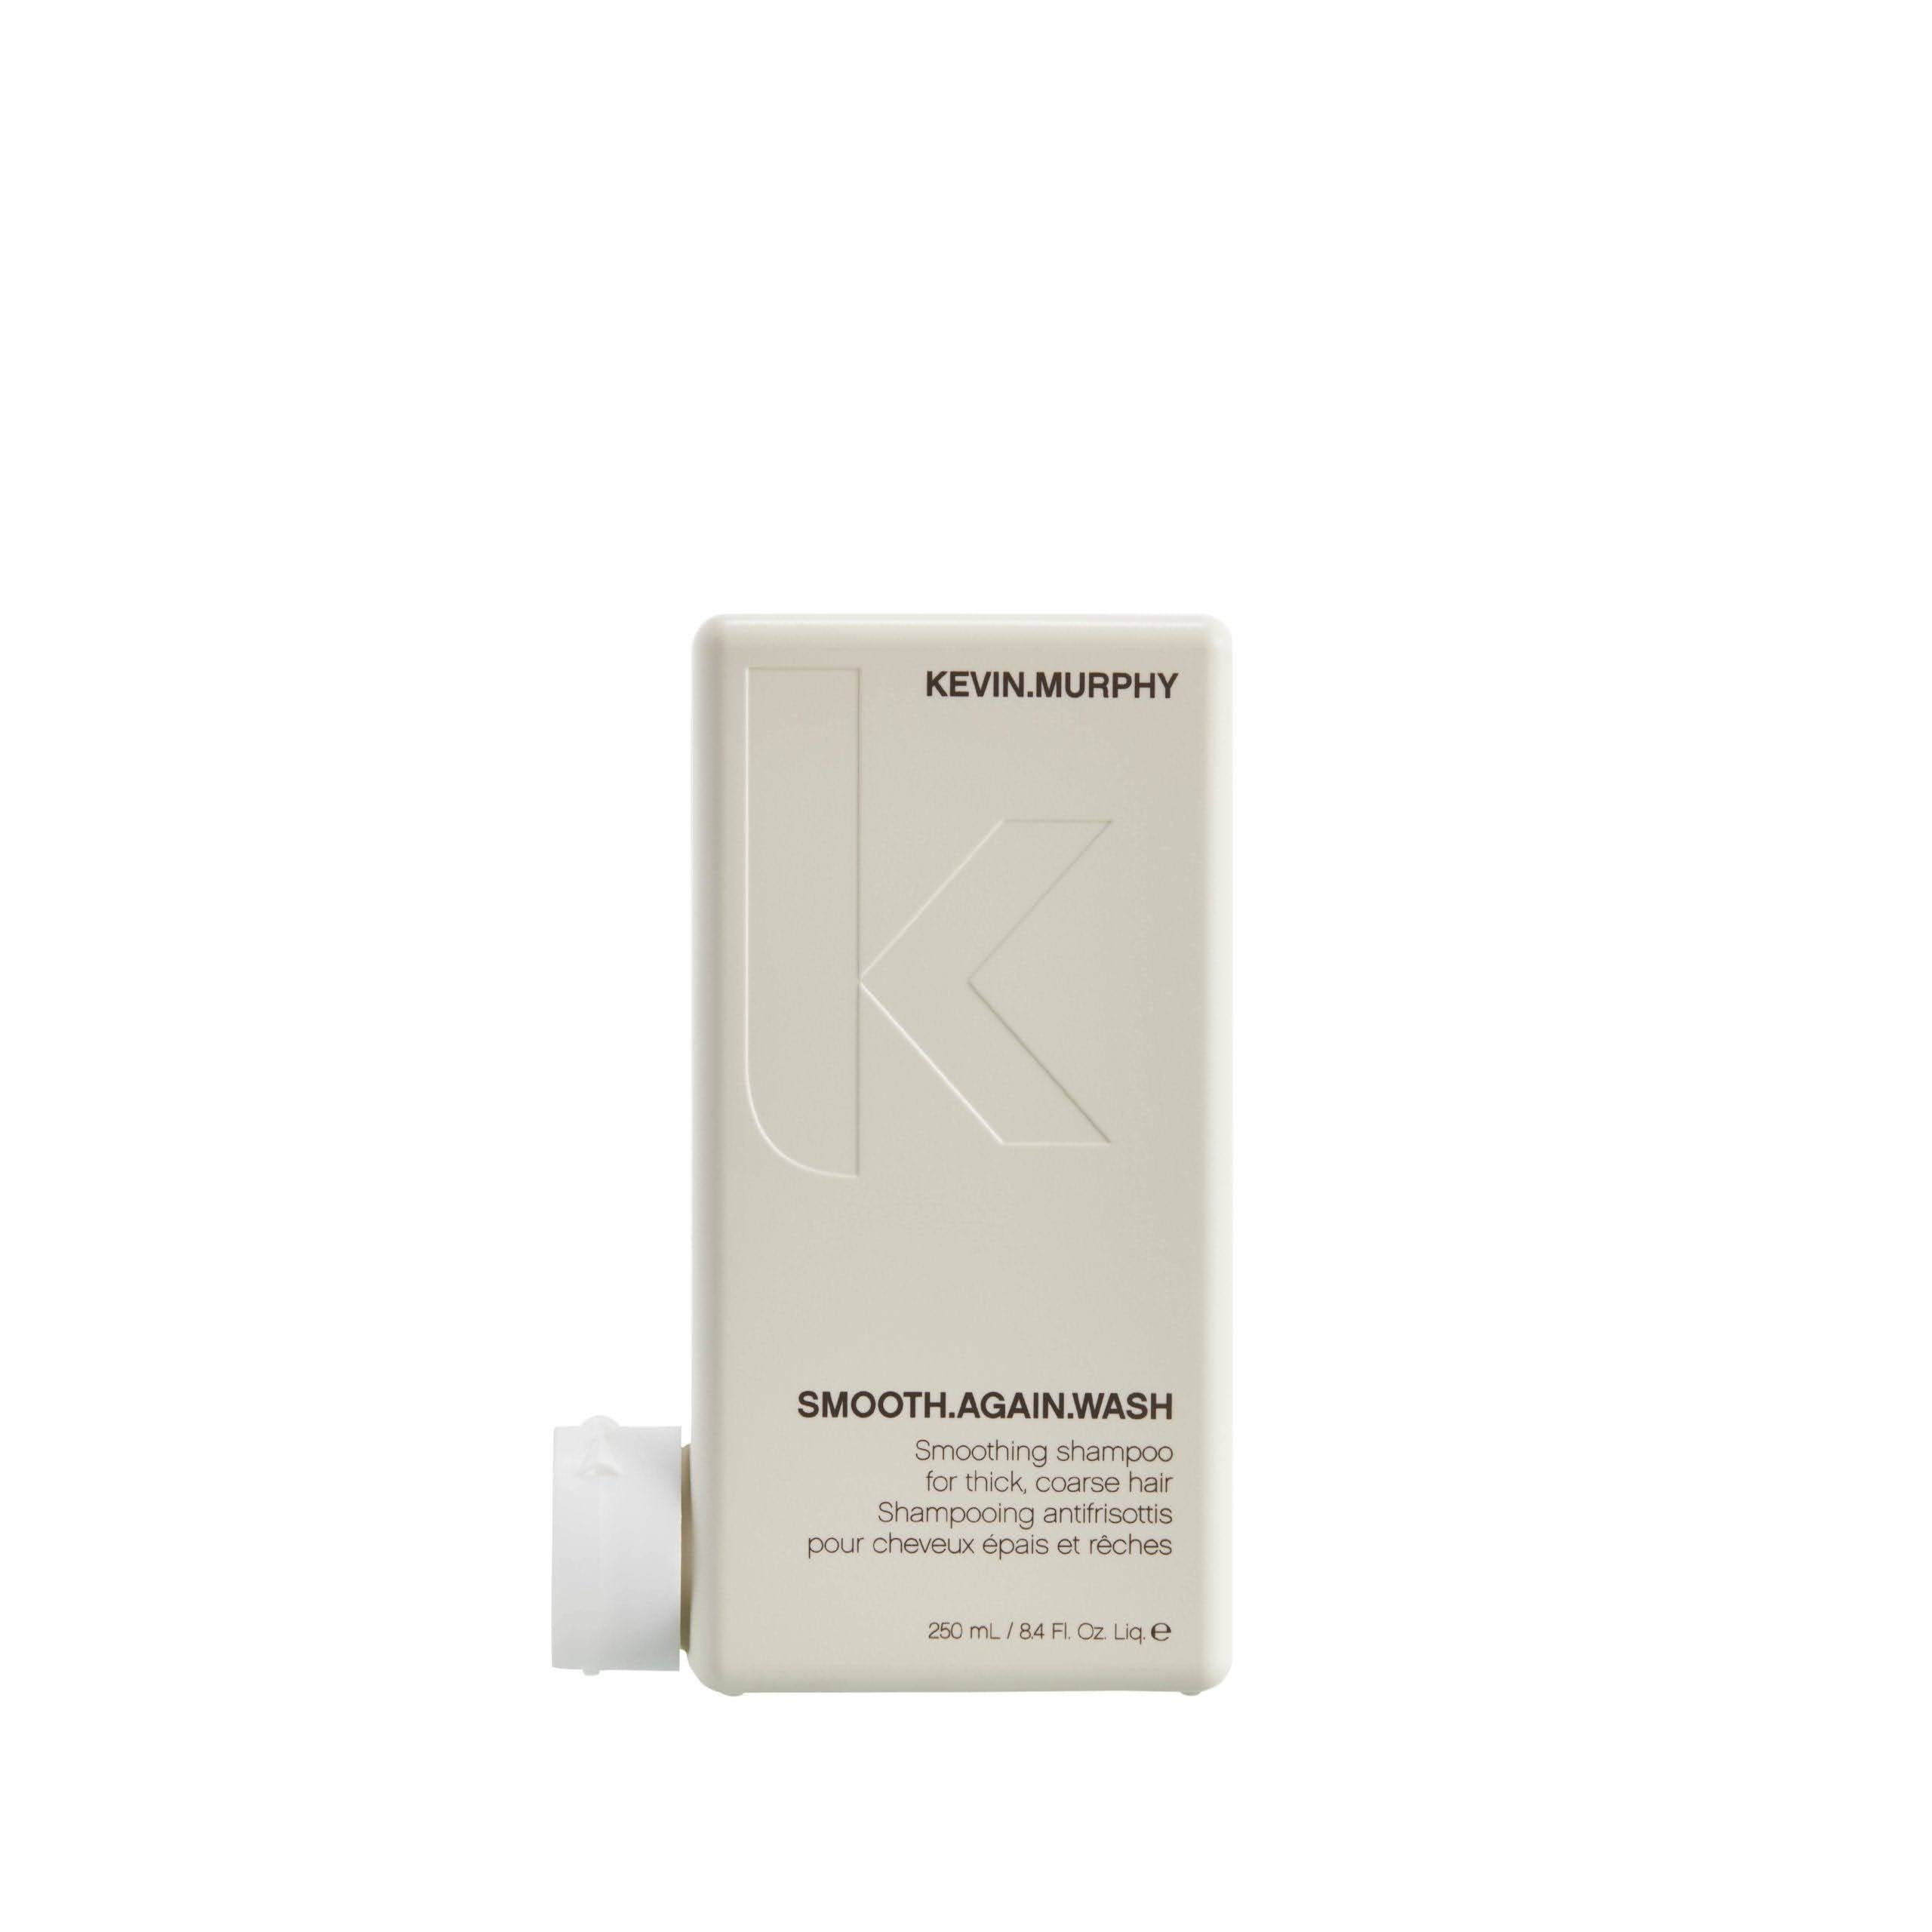 KEVIN.MURPHY Smooth.Again.Wash